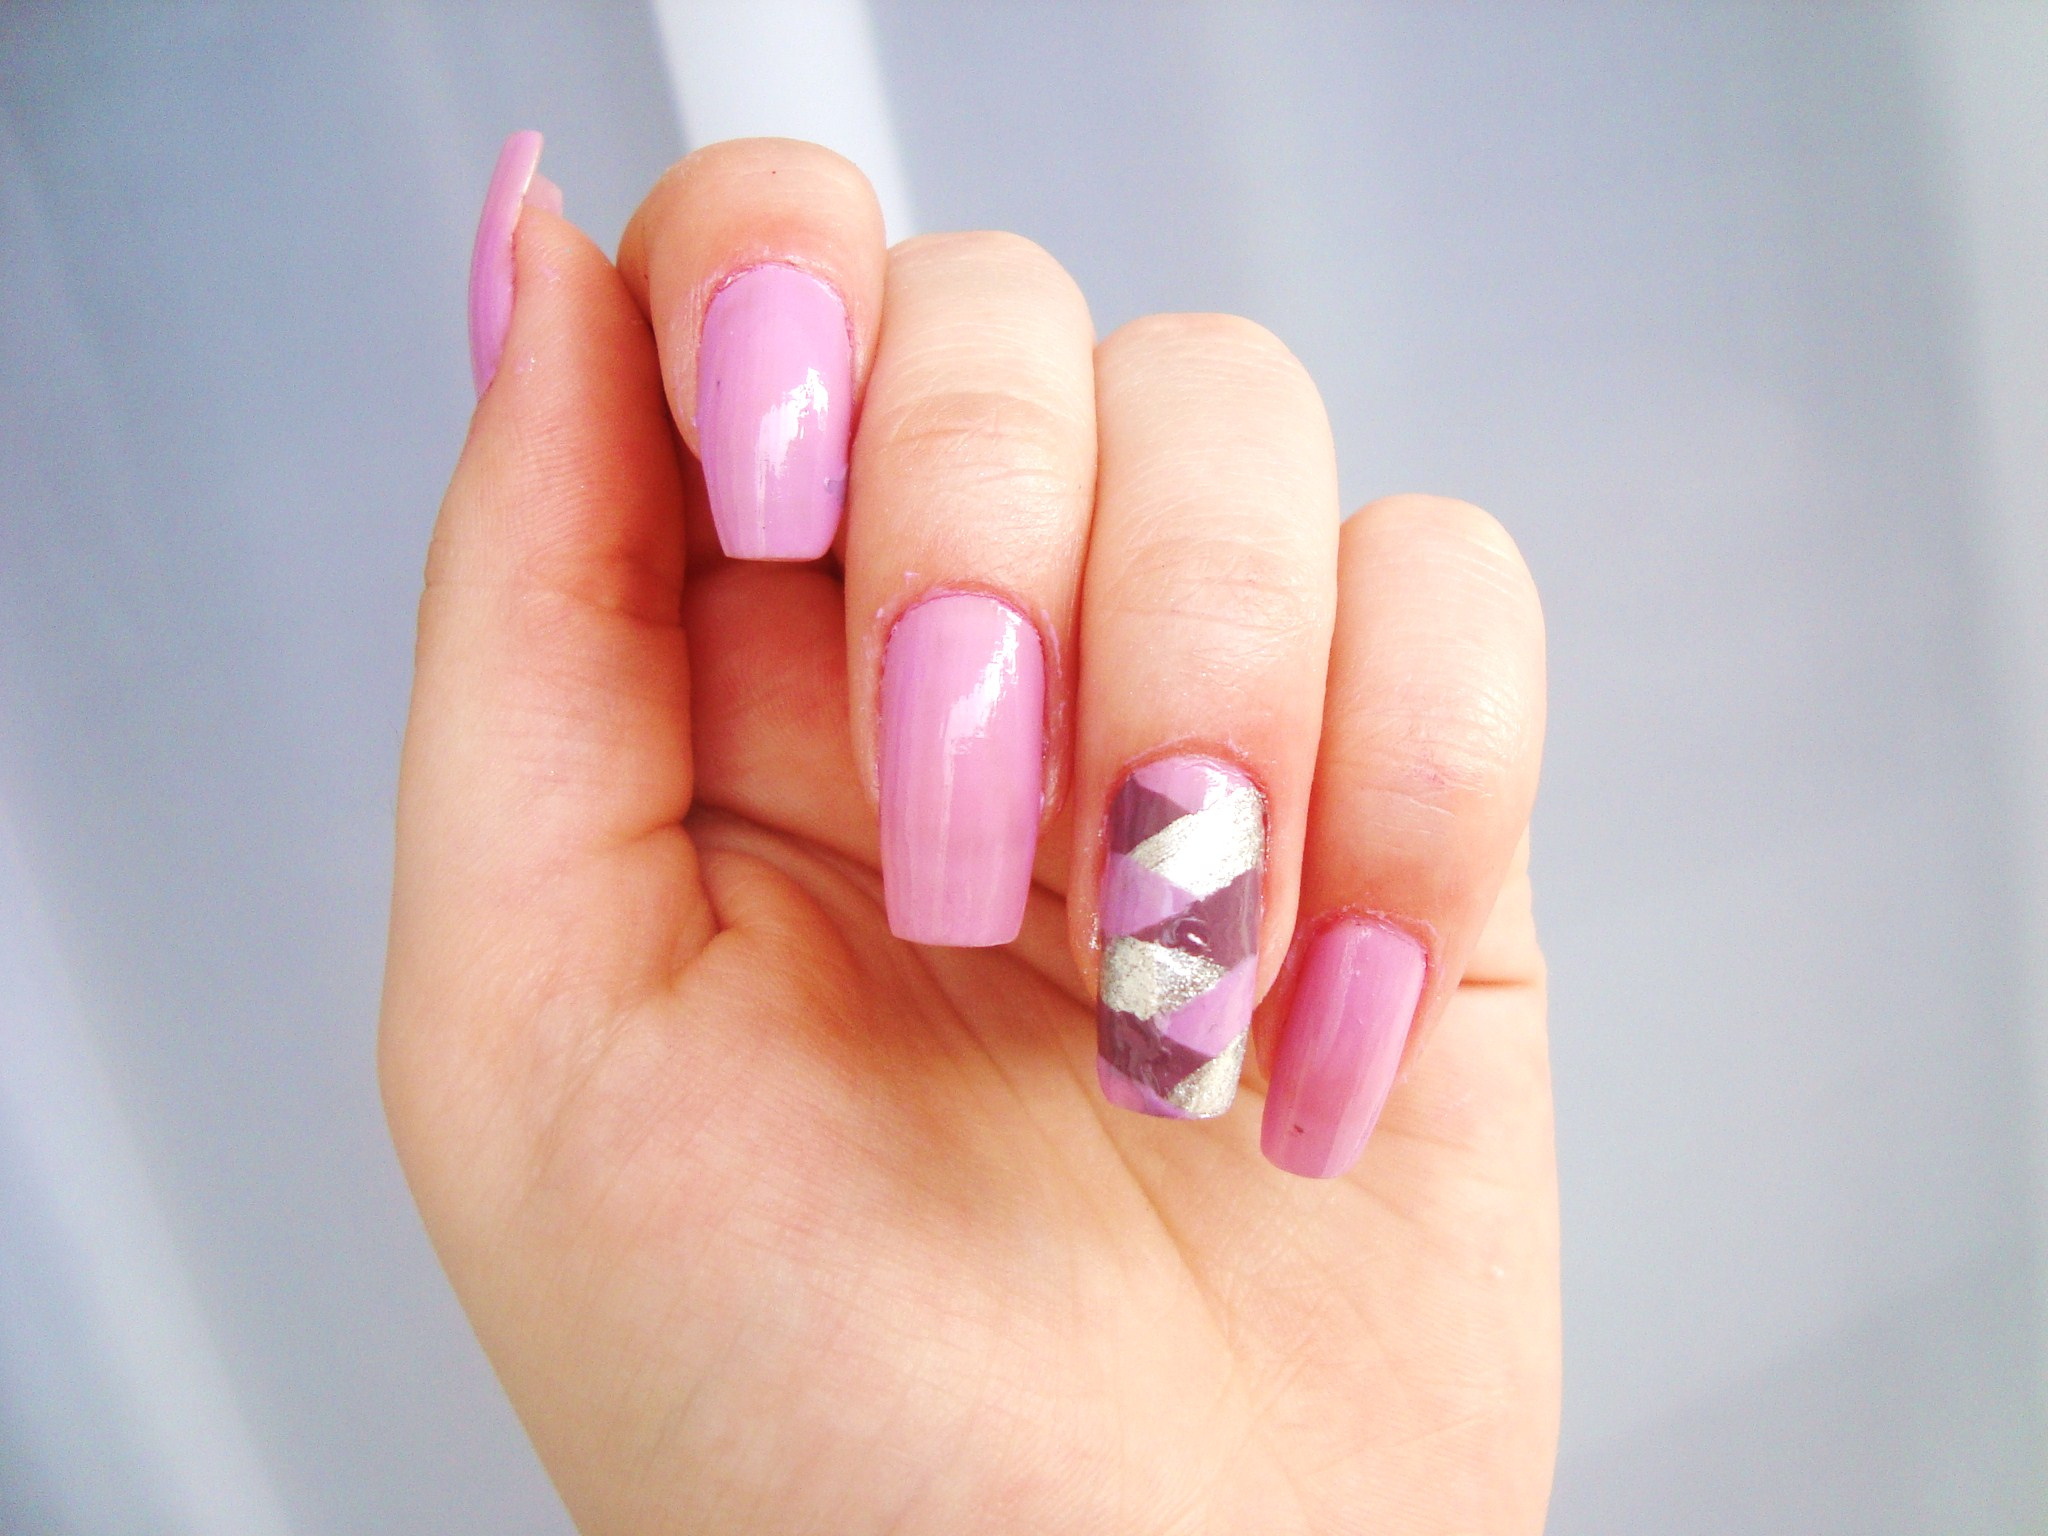 4. "Nail Art Videos" on Dailymotion - wide 1